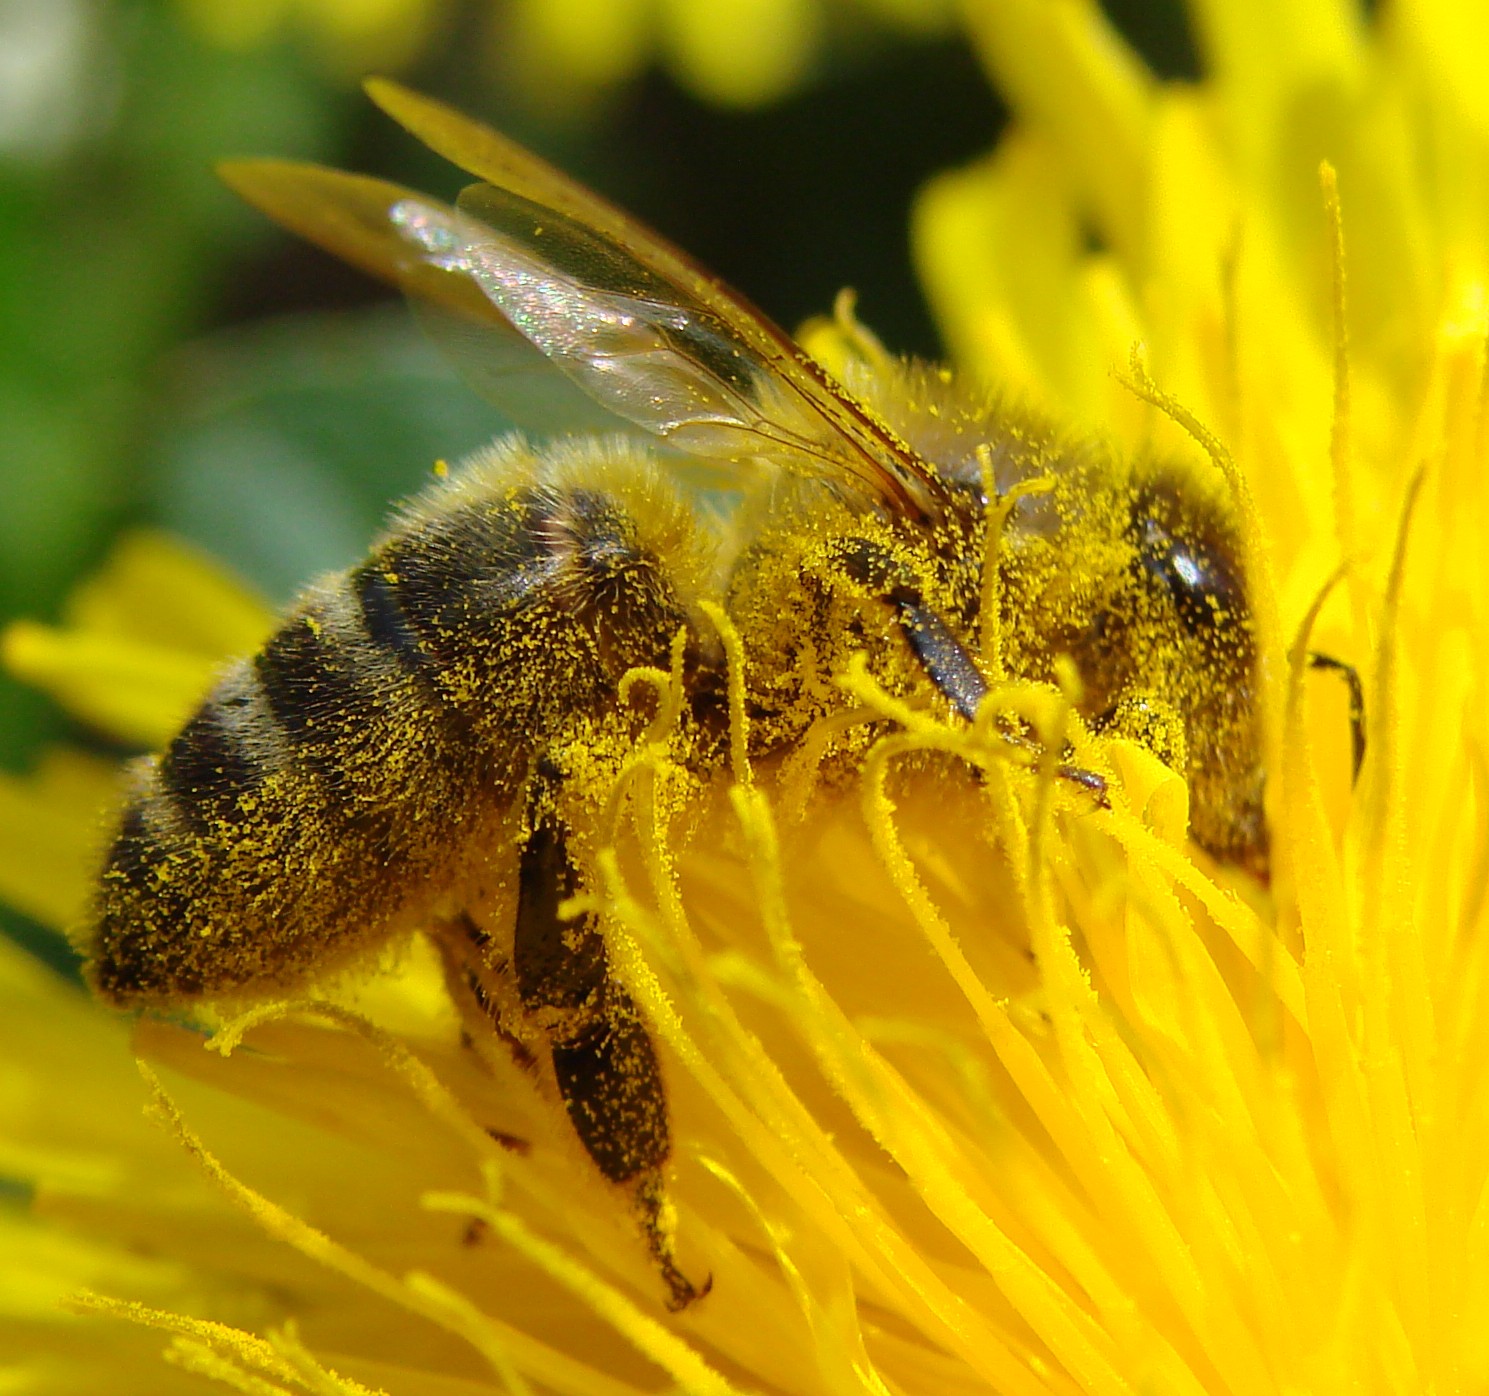 Do this: Plant flowers near your crops to boost bee populations and environmental health